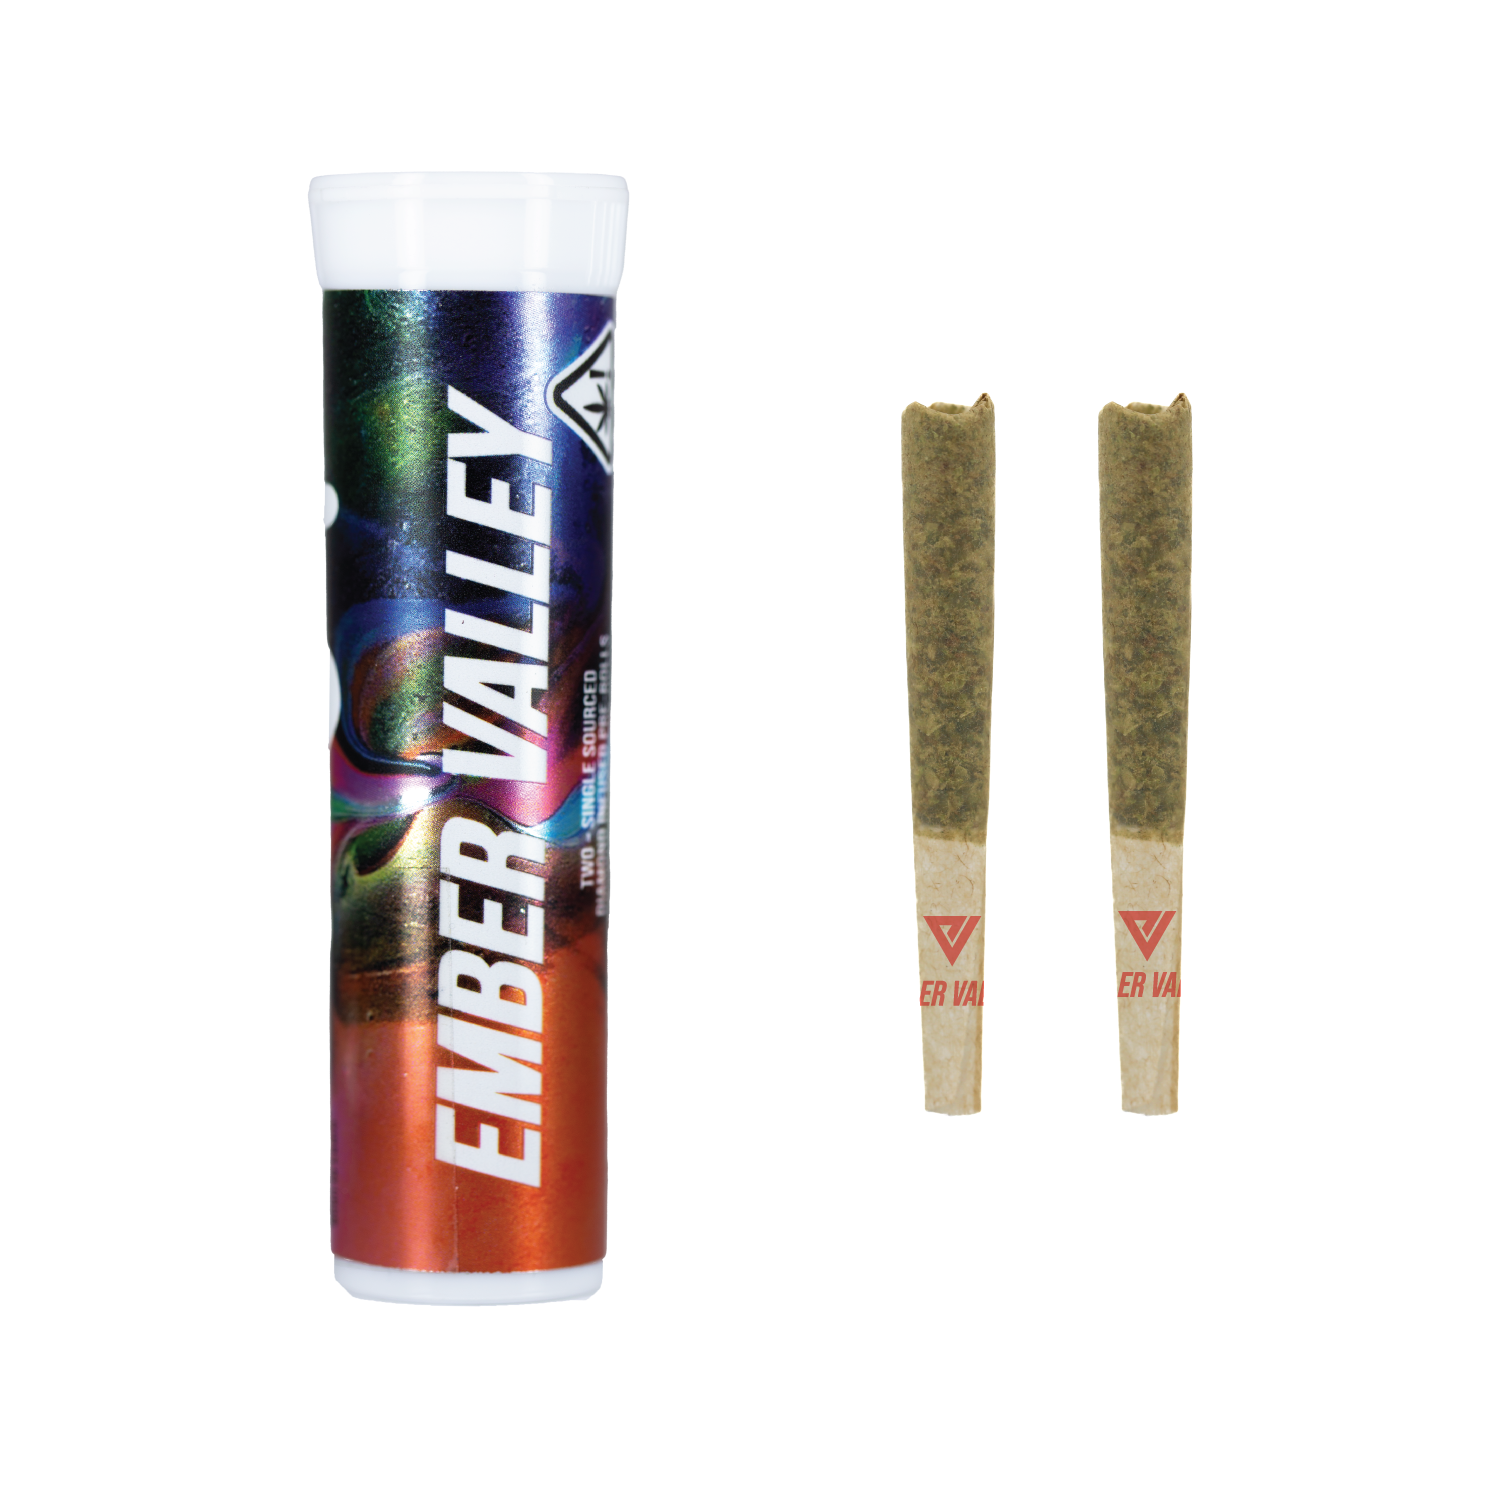 Gastro Pop Infused Pre-Roll 2 Pack [.5G]